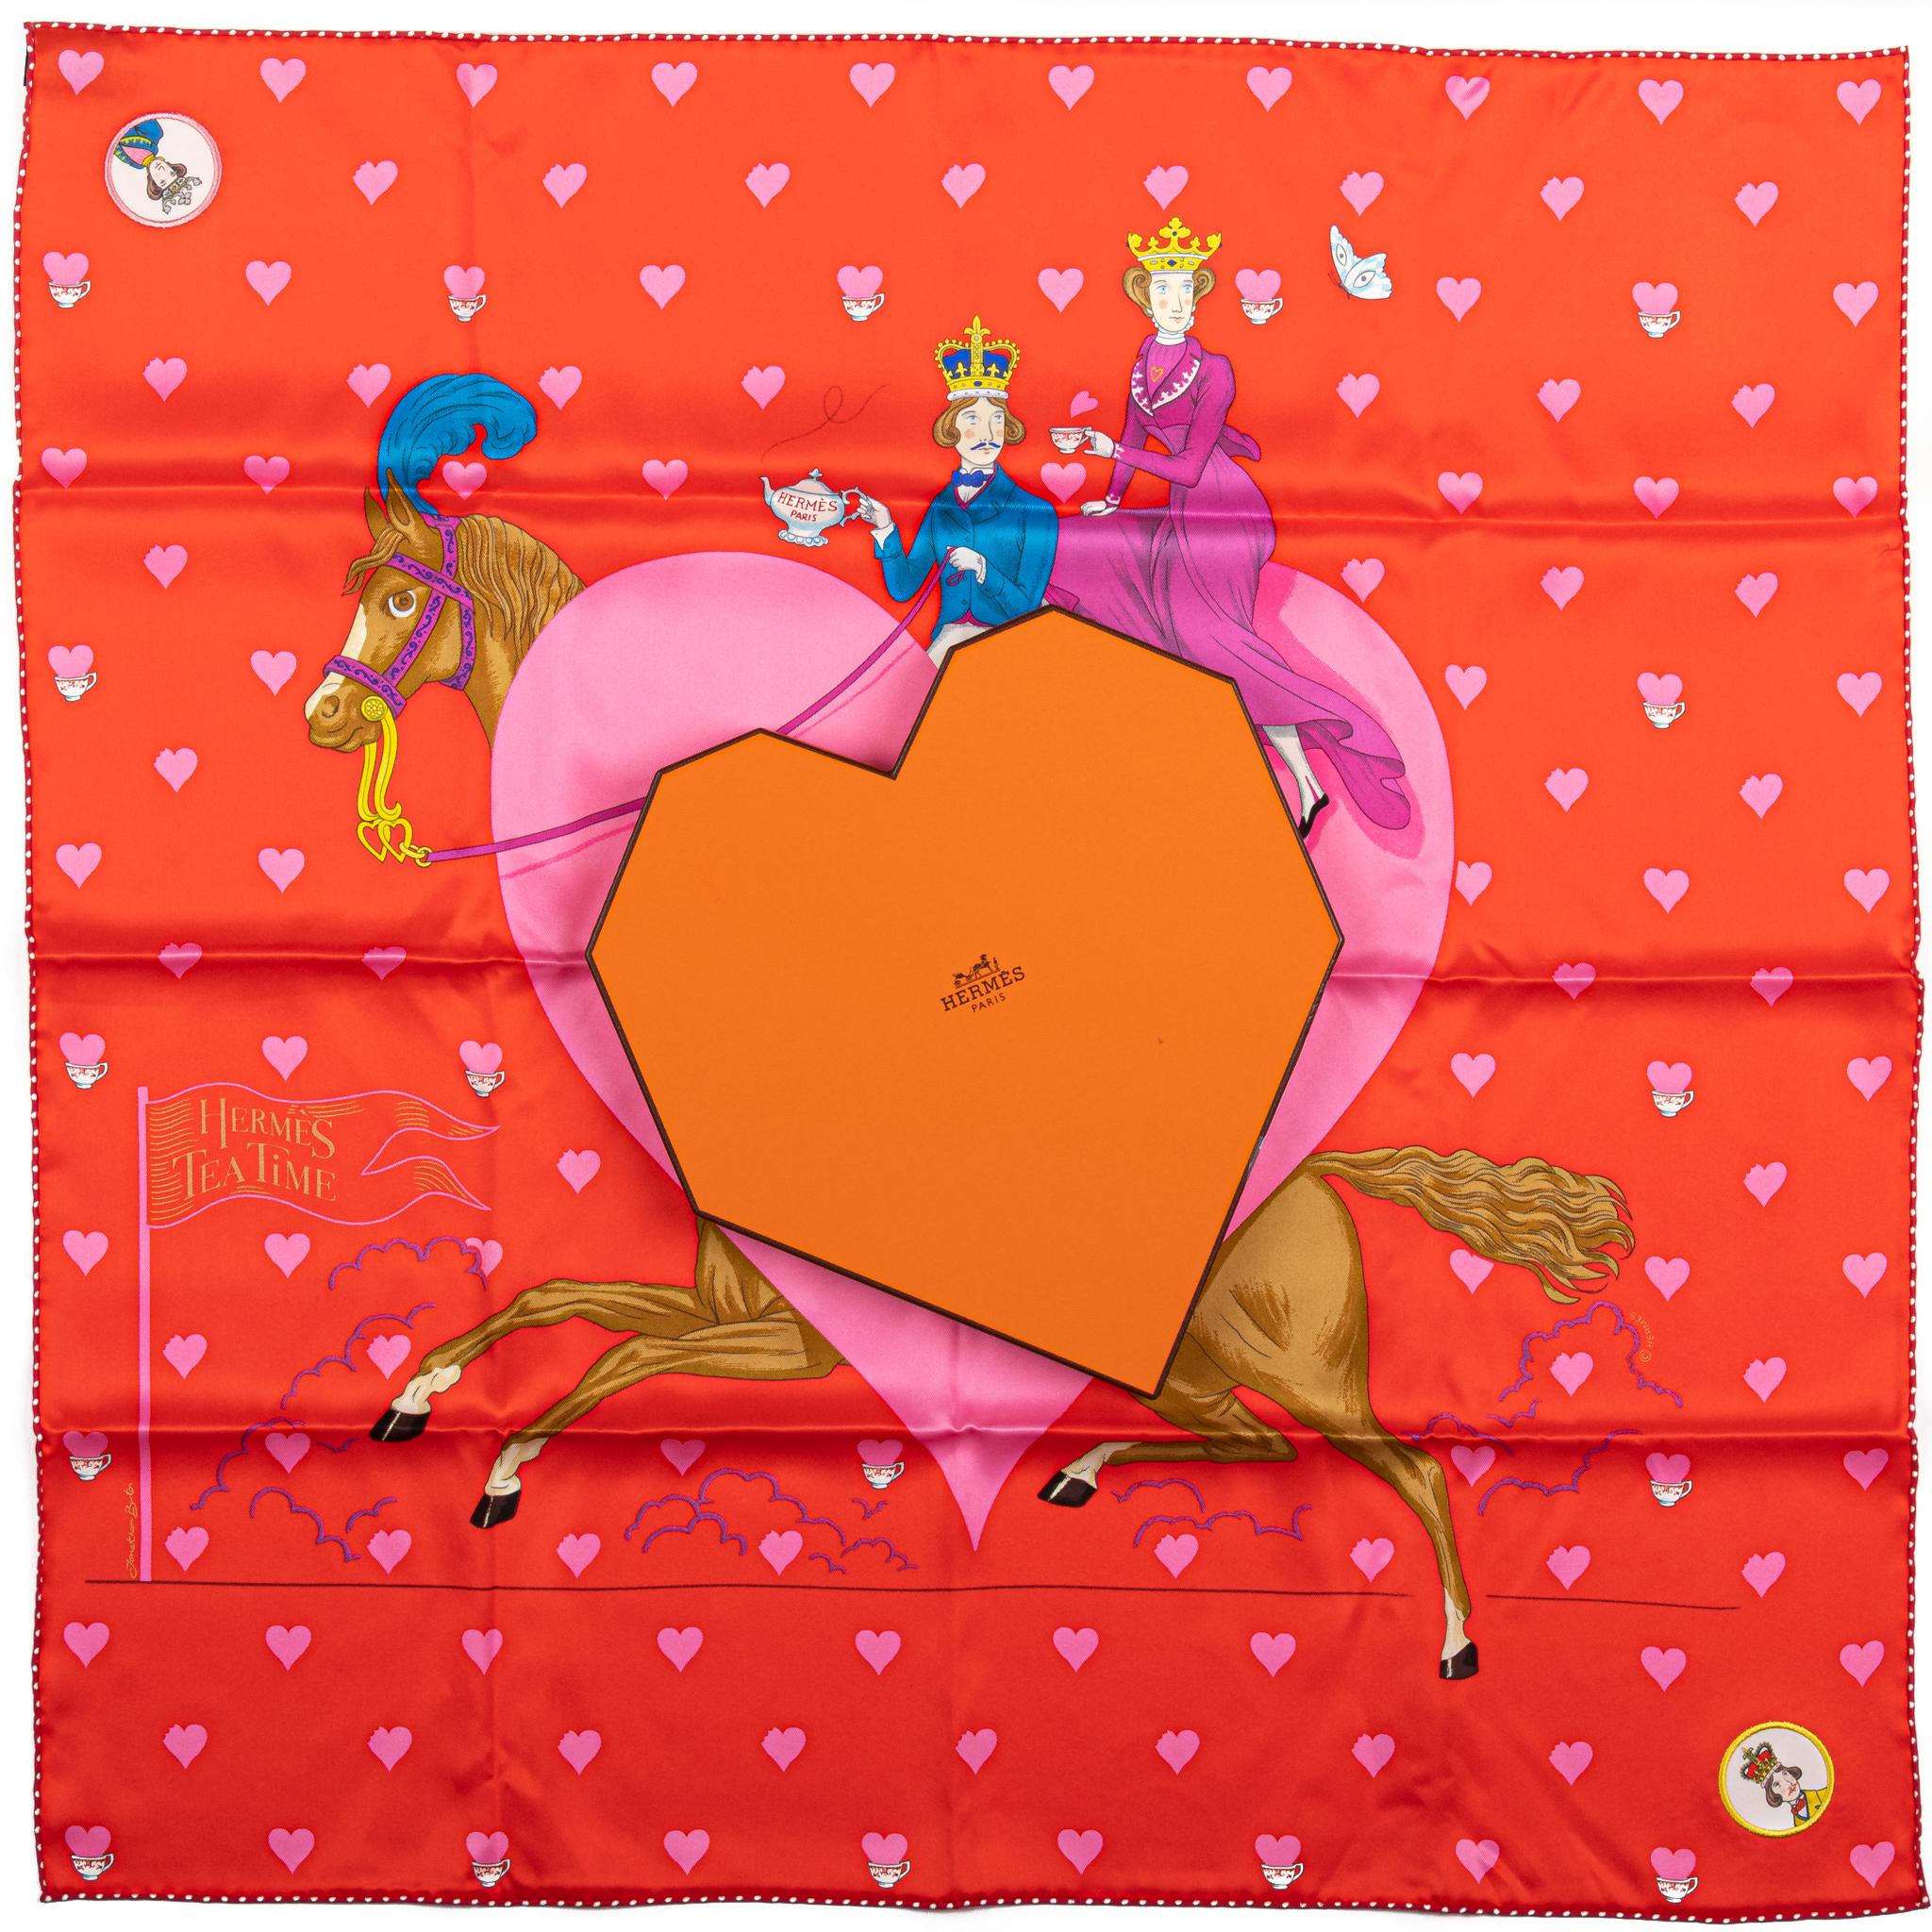 Hermès Carre Calfskin scarf in red rouge. The center piece is an image of a horse carrying a Prince and Princess. The scarf is made of silk and comes with the original box in form of a heart.